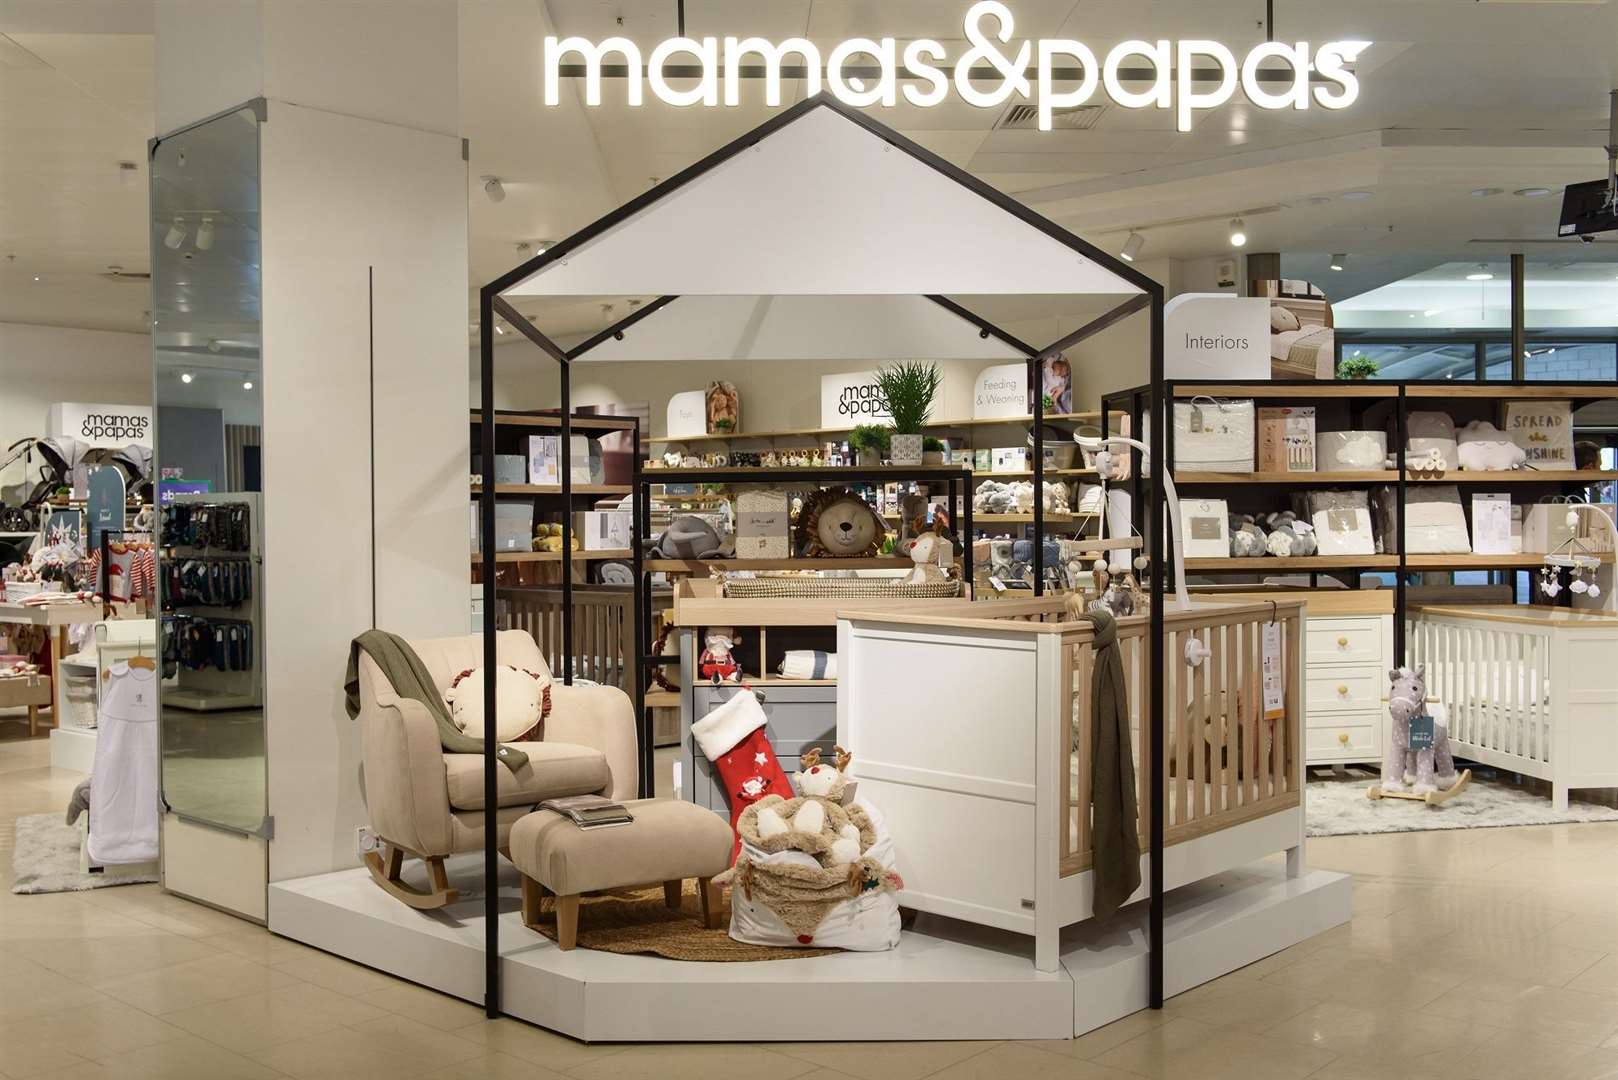 Mamas & Papas has opened a new shop inside of Marks & Spencer, in Bluewater